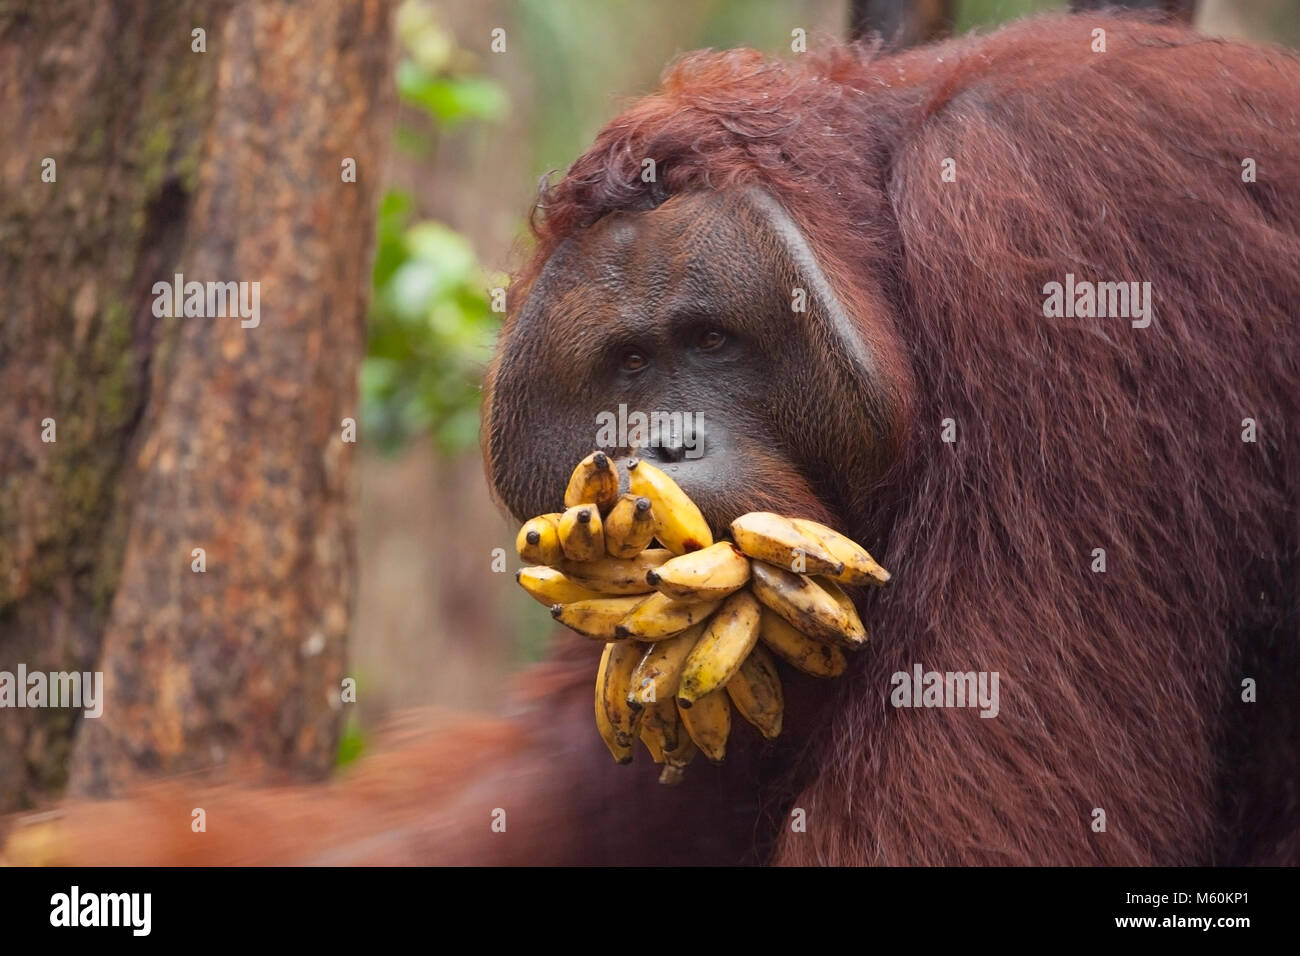 Wild orangutan dominant male (Pongo pygmaeus) with mouth stuffed full of bananas from Camp Leakey feeding station in Tanjung Puting National Park Stock Photo